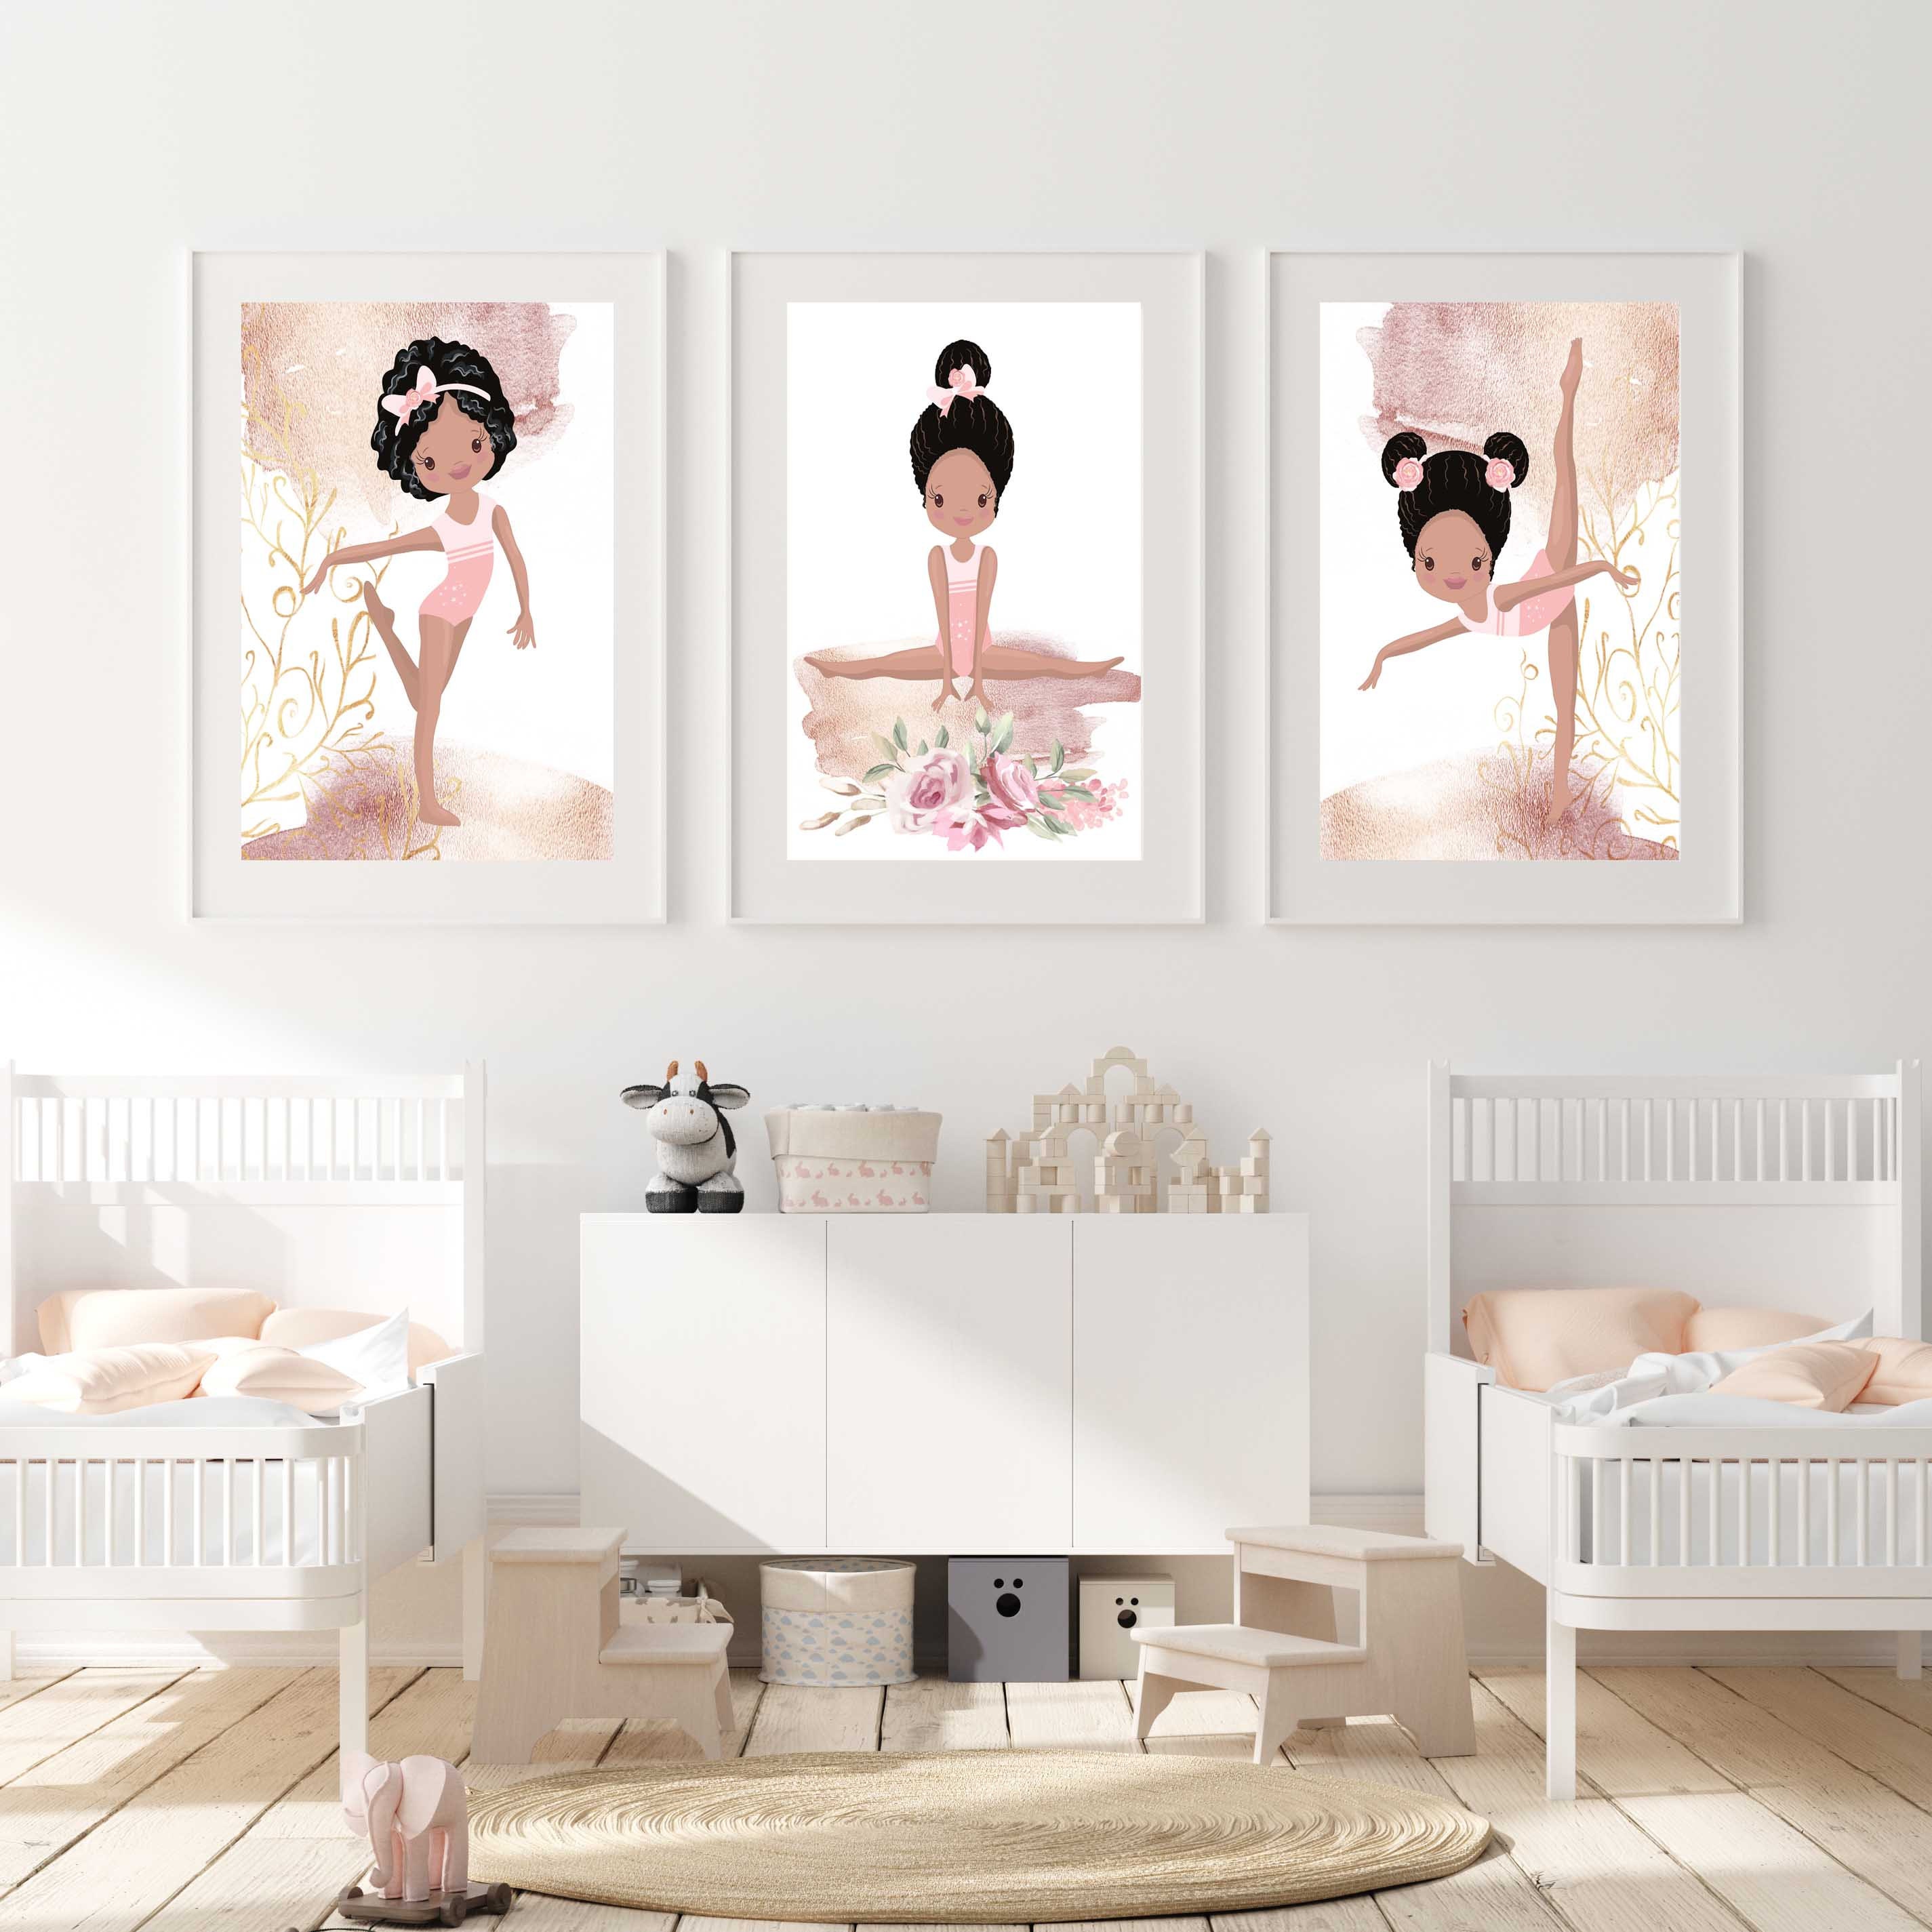 Tangbasi® Ballet Girl Modern Wall Art Canvas Wall Decorative Painting for Home Decor 